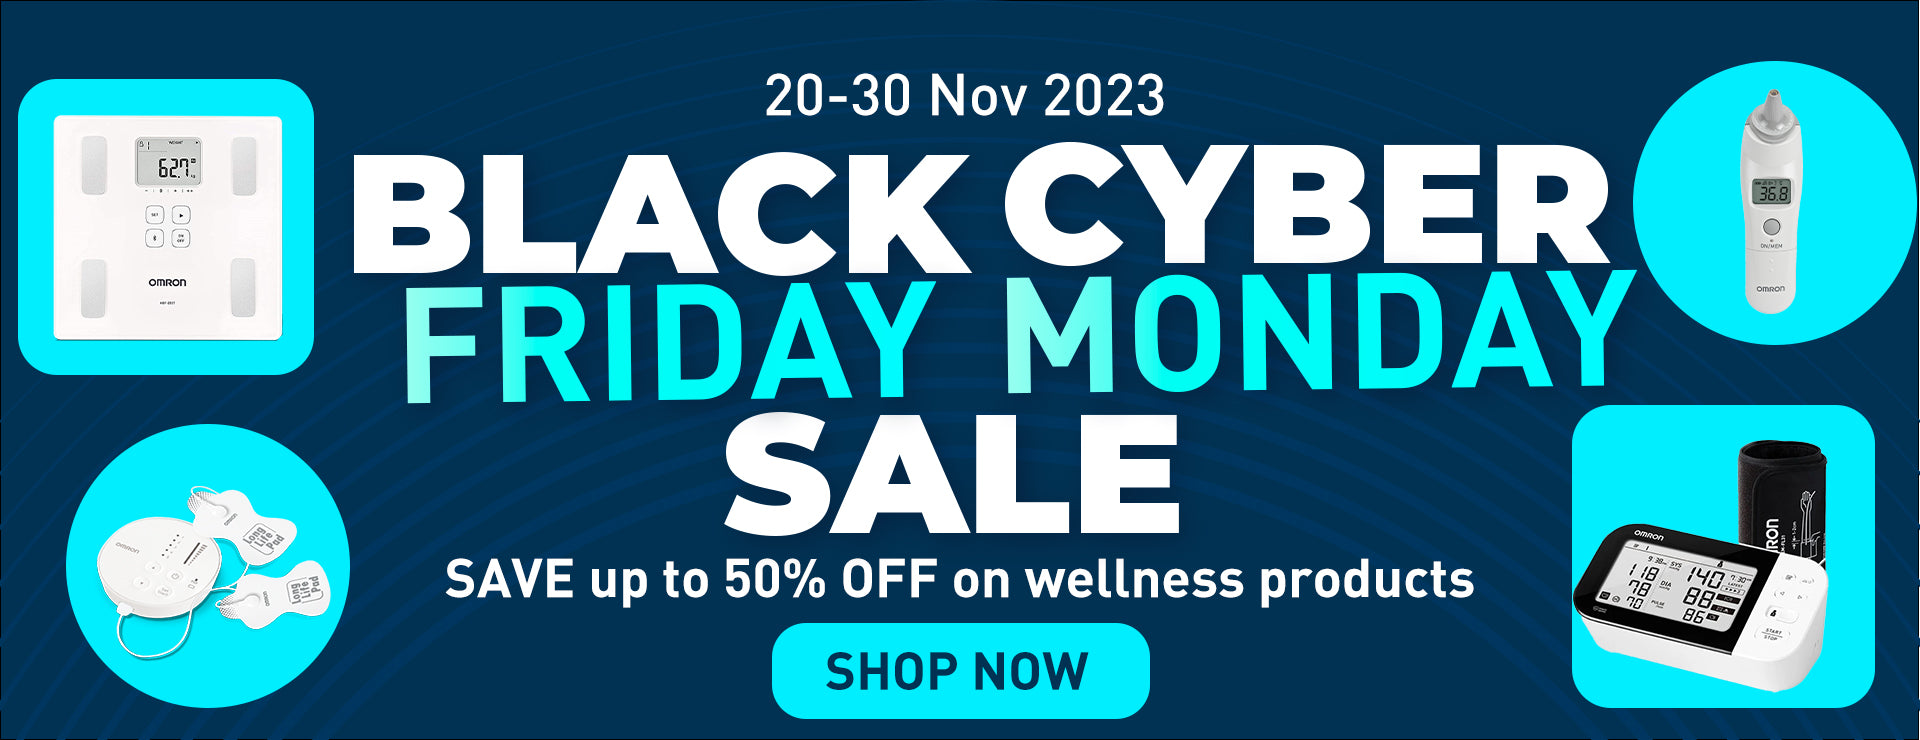 BLACK FRIDAY & CYBER MONDAY SALE from 20 to 30 November